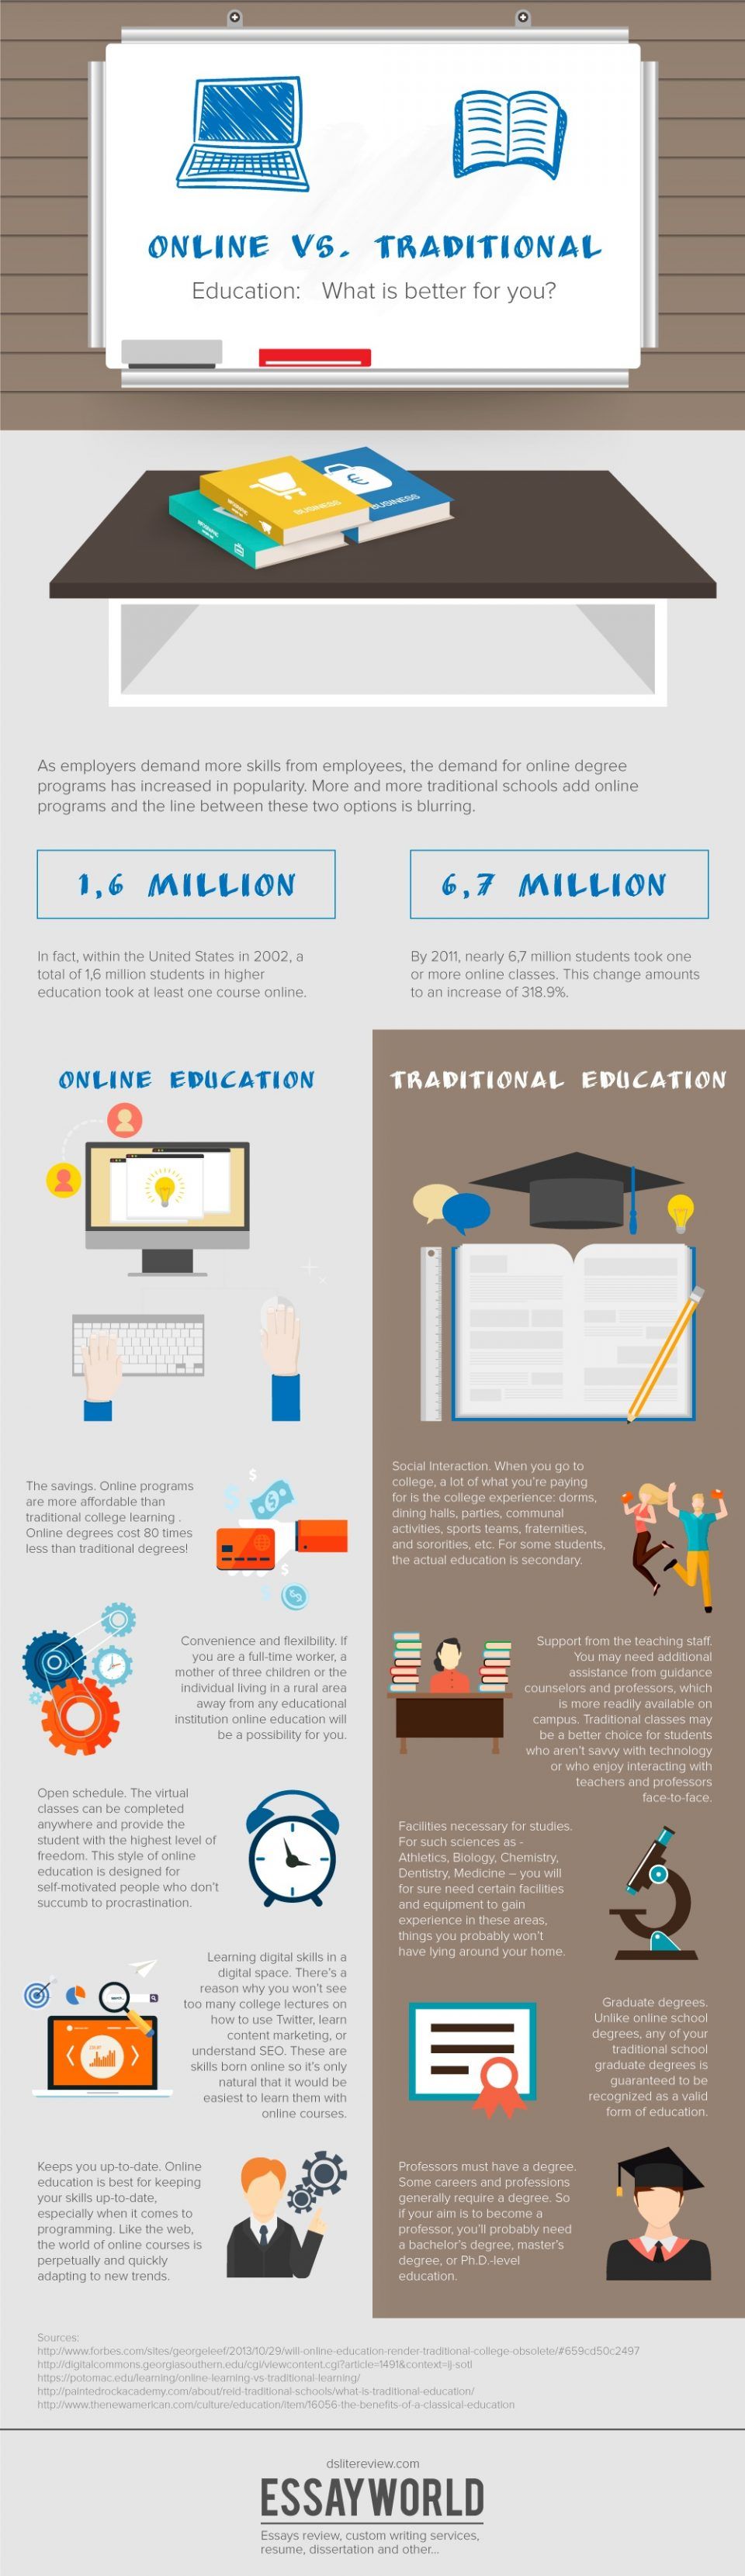 Online vs Traditional Education Infographic